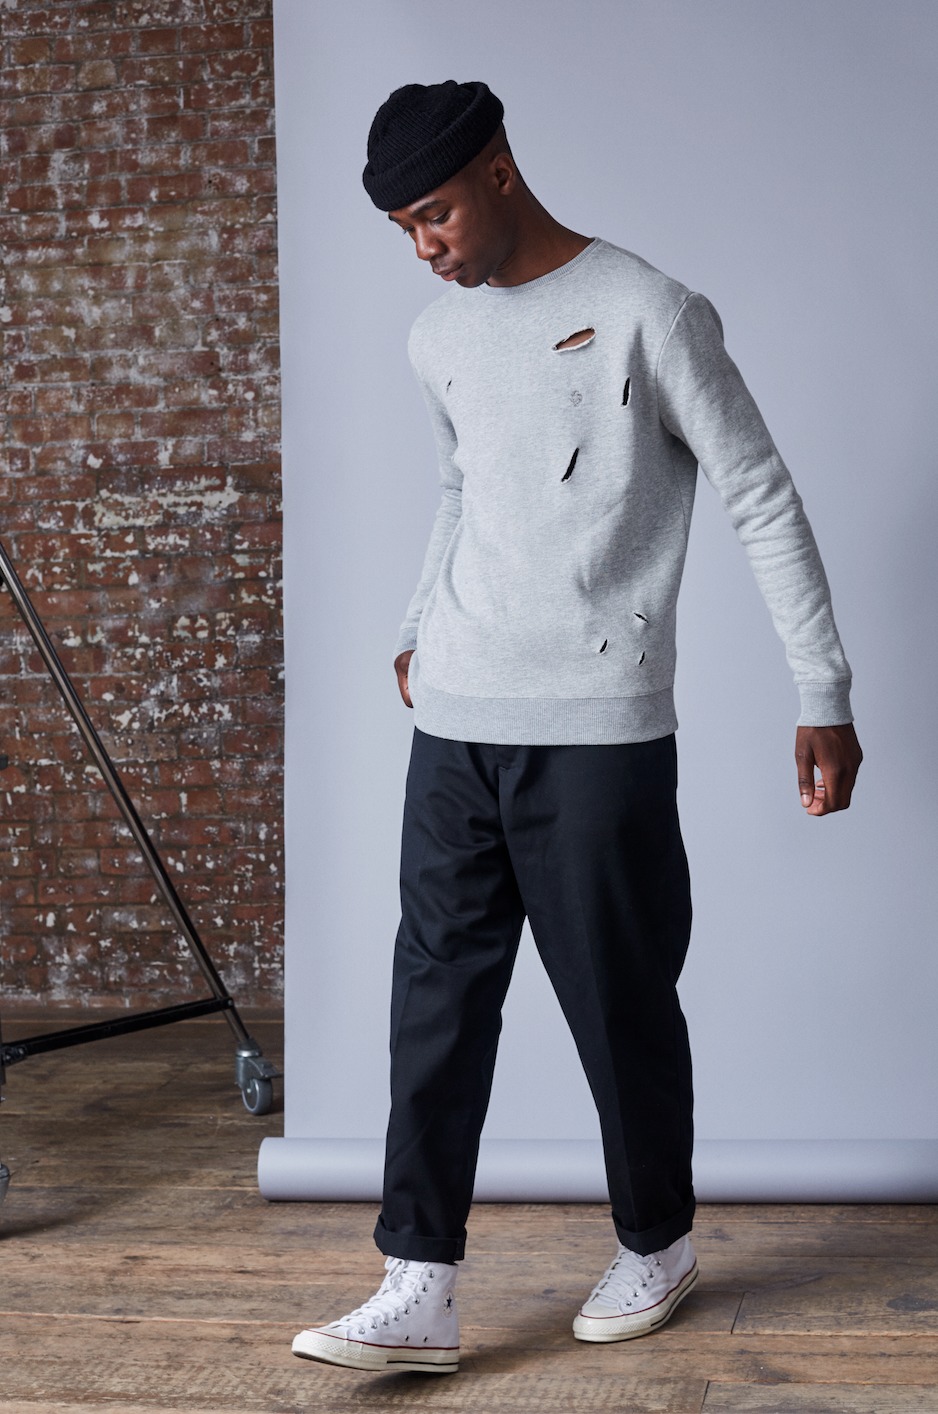 Noose & Monkey Release Casual Wear Capsule Collection For Autumn/Winter ...